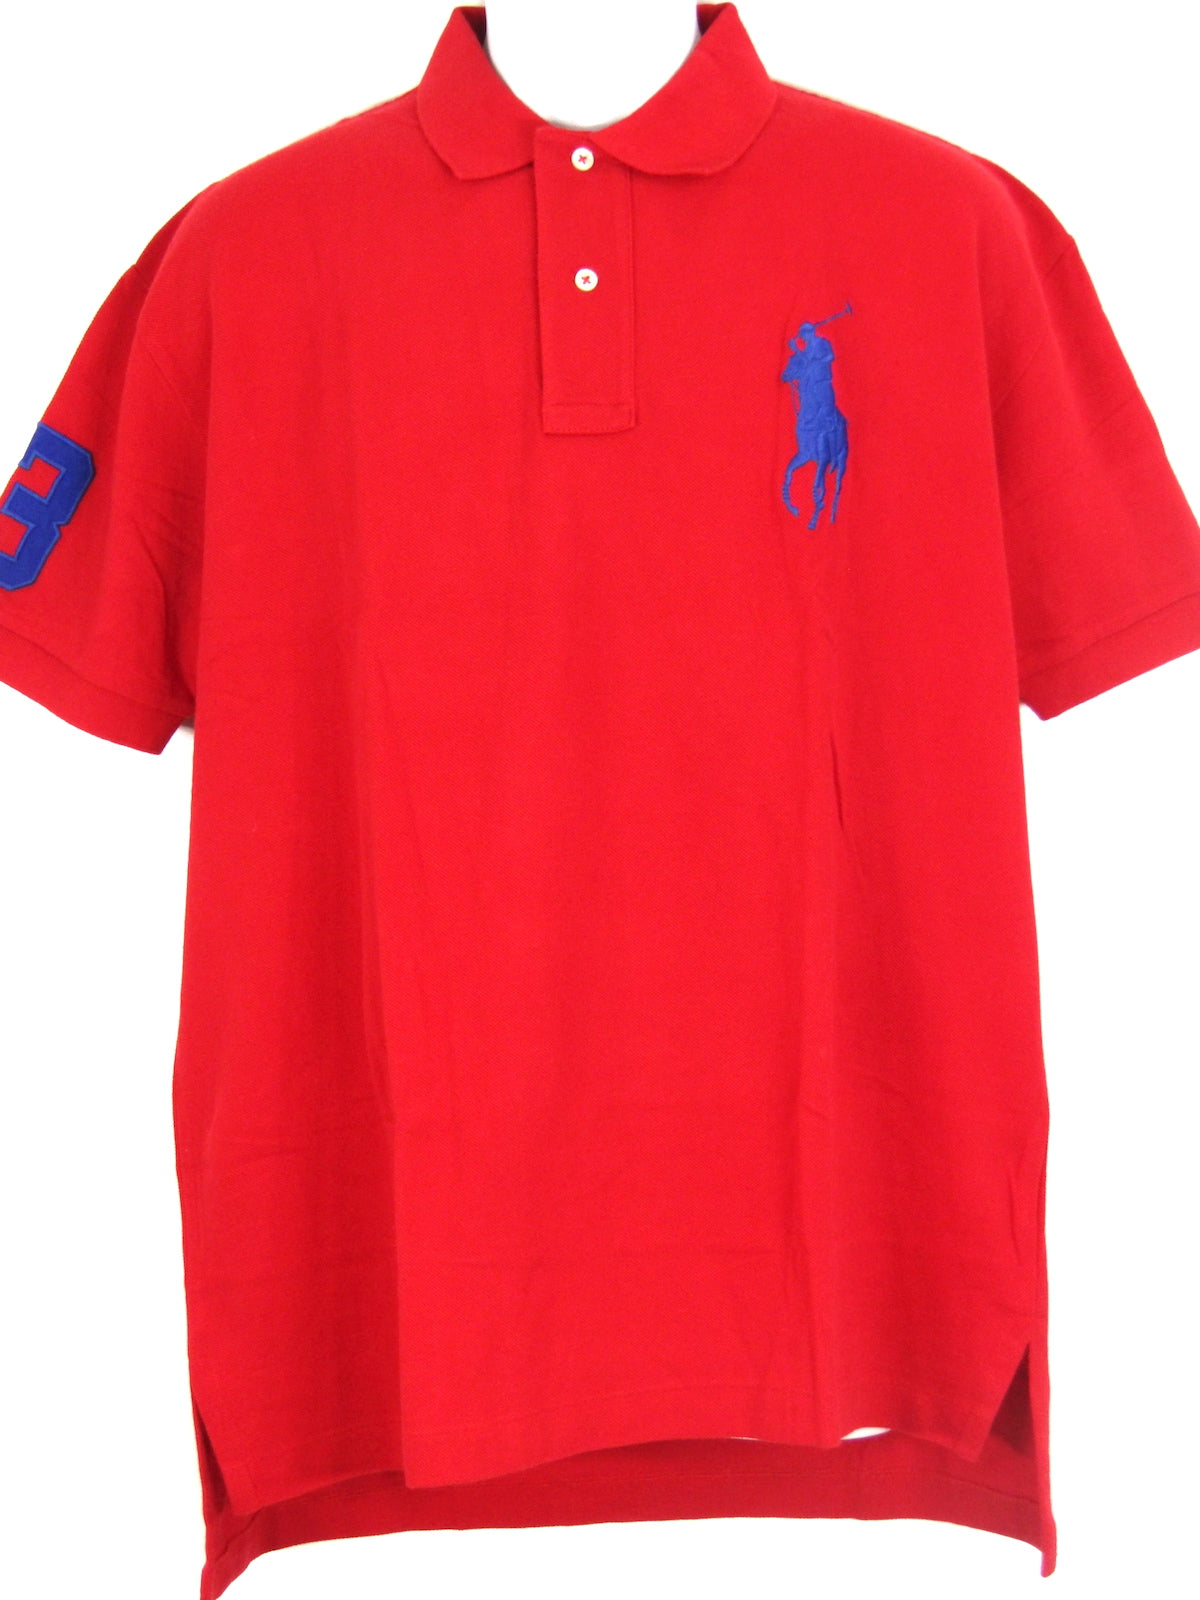 polo red blue